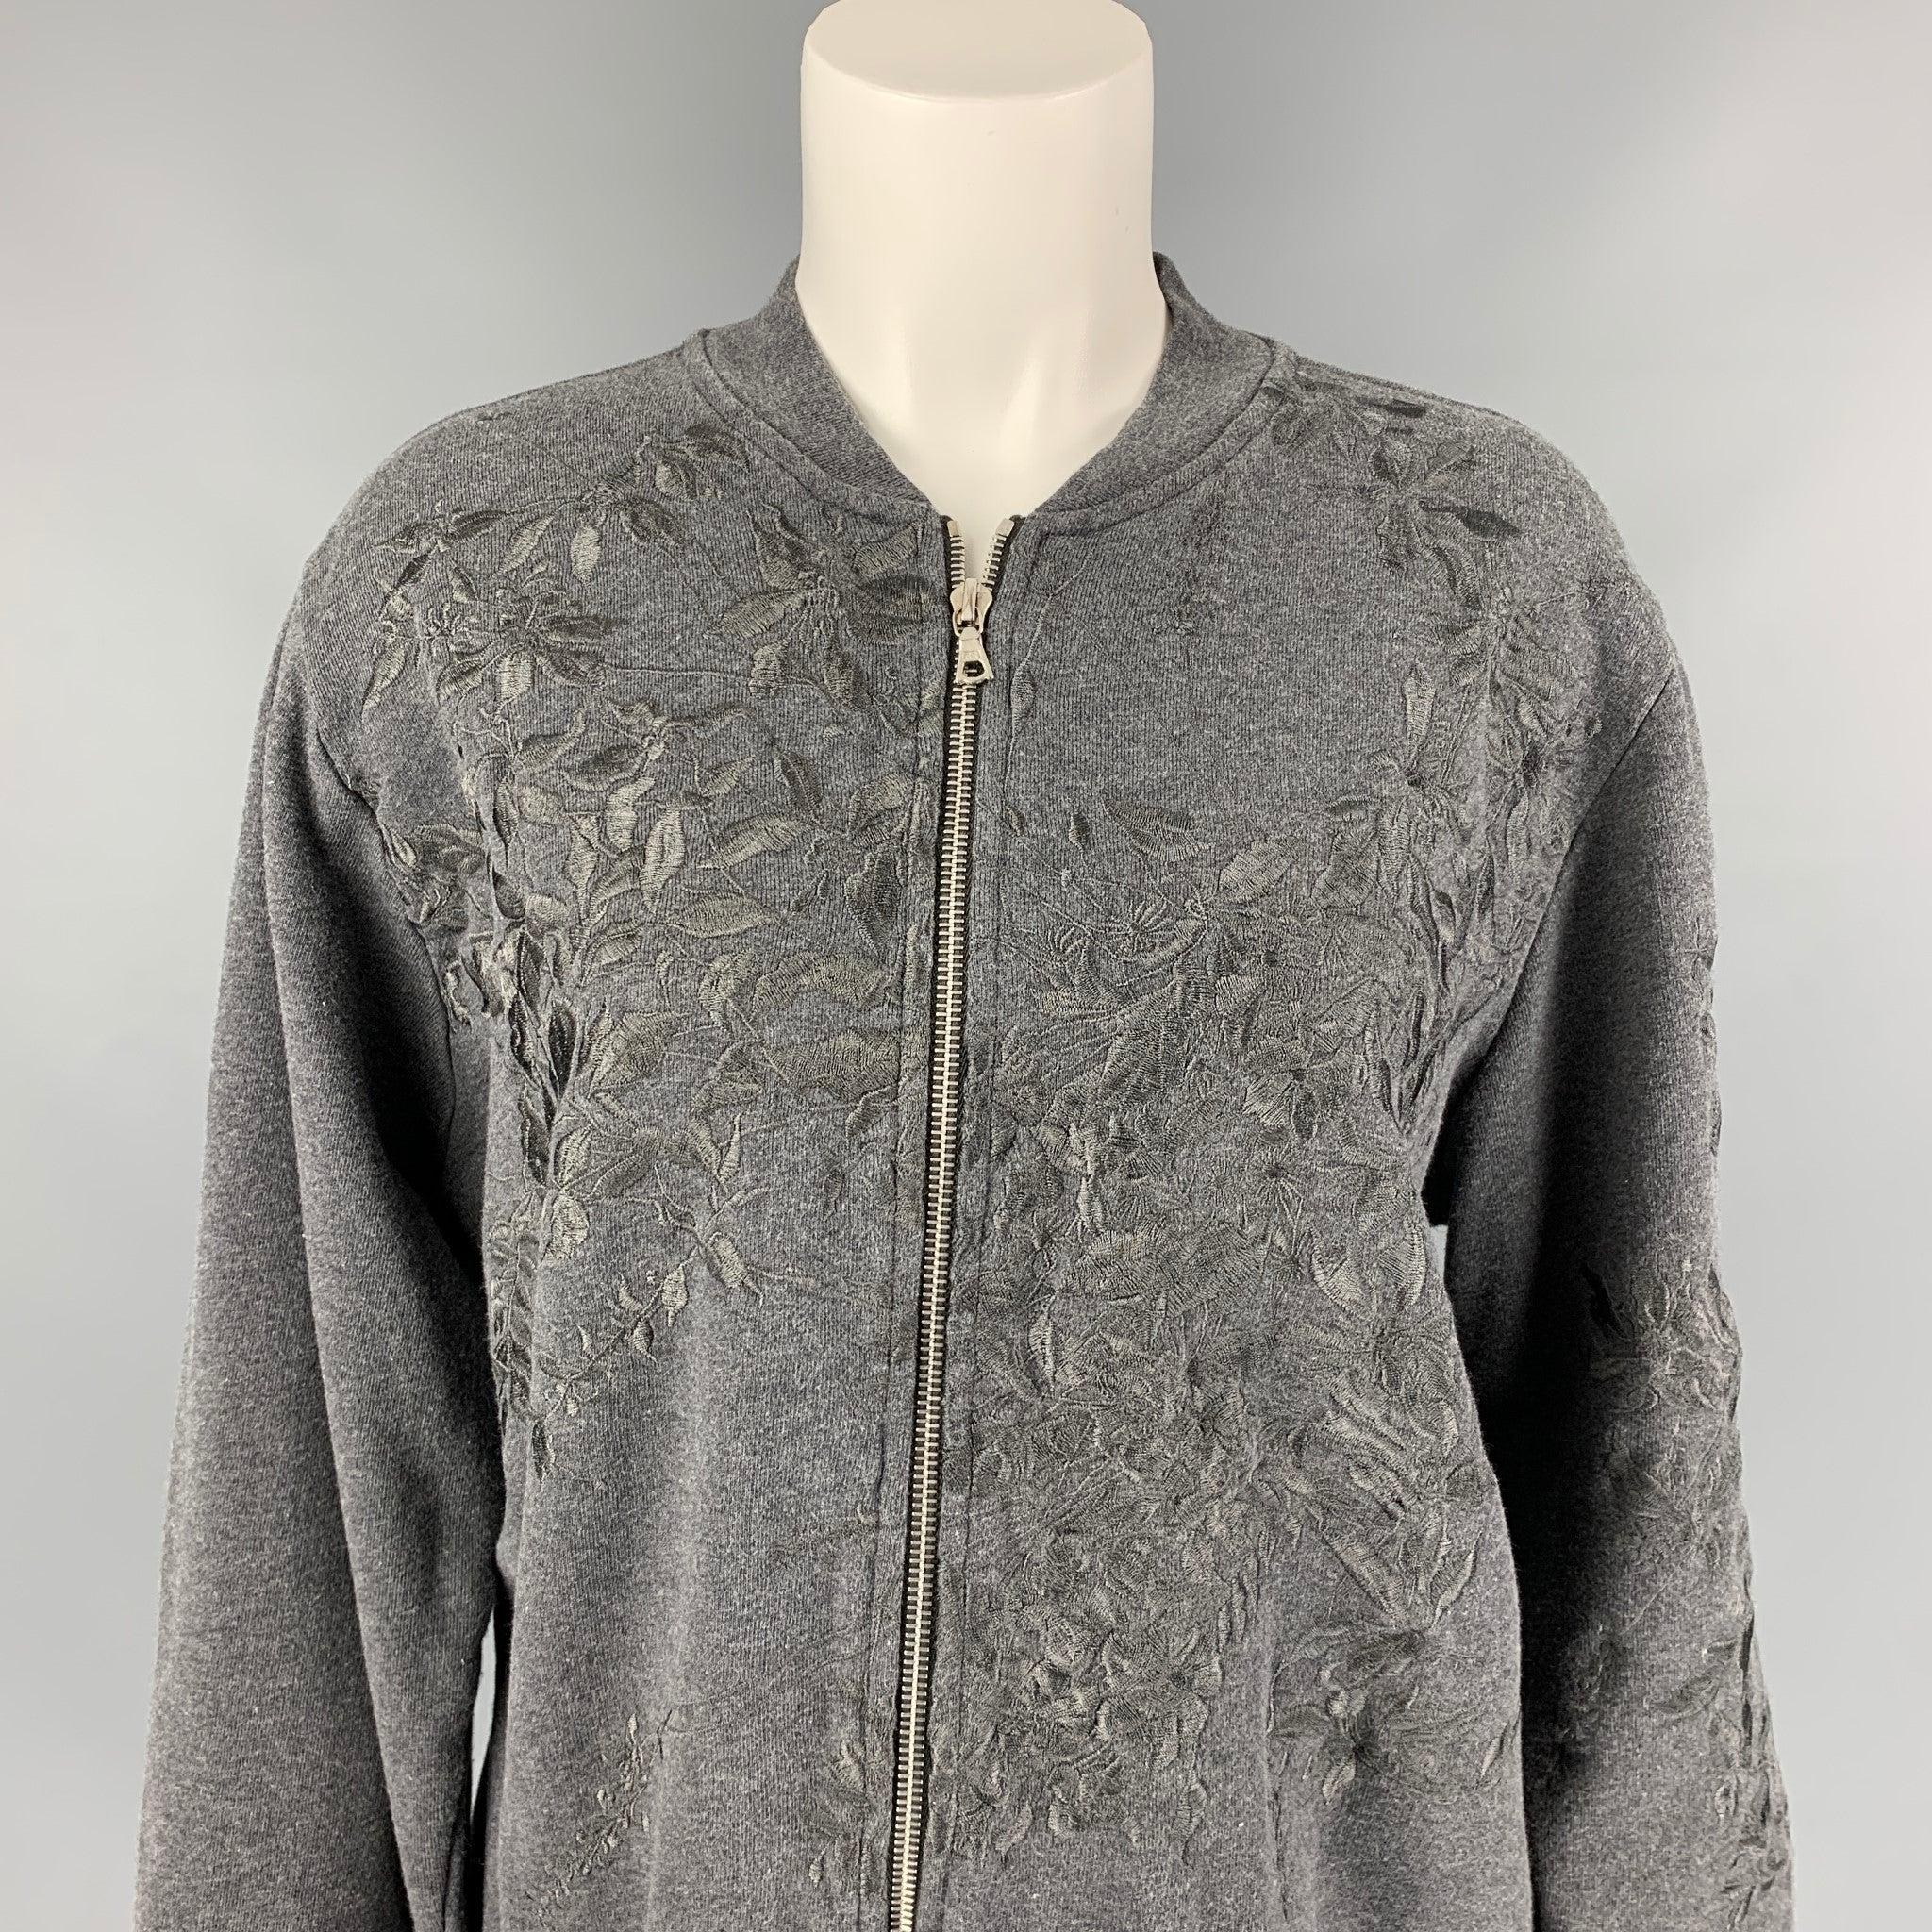 DRIES VAN NOTEN jacket comes in a dark gray cotton with embroidered details featuring a bomber style, and a full zip up closure.
Very Good
Pre-Owned Condition. 

Marked:   L 

Measurements: 
 
Shoulder: 18 inches  Bust: 42 inches  Sleeve: 25 inches 